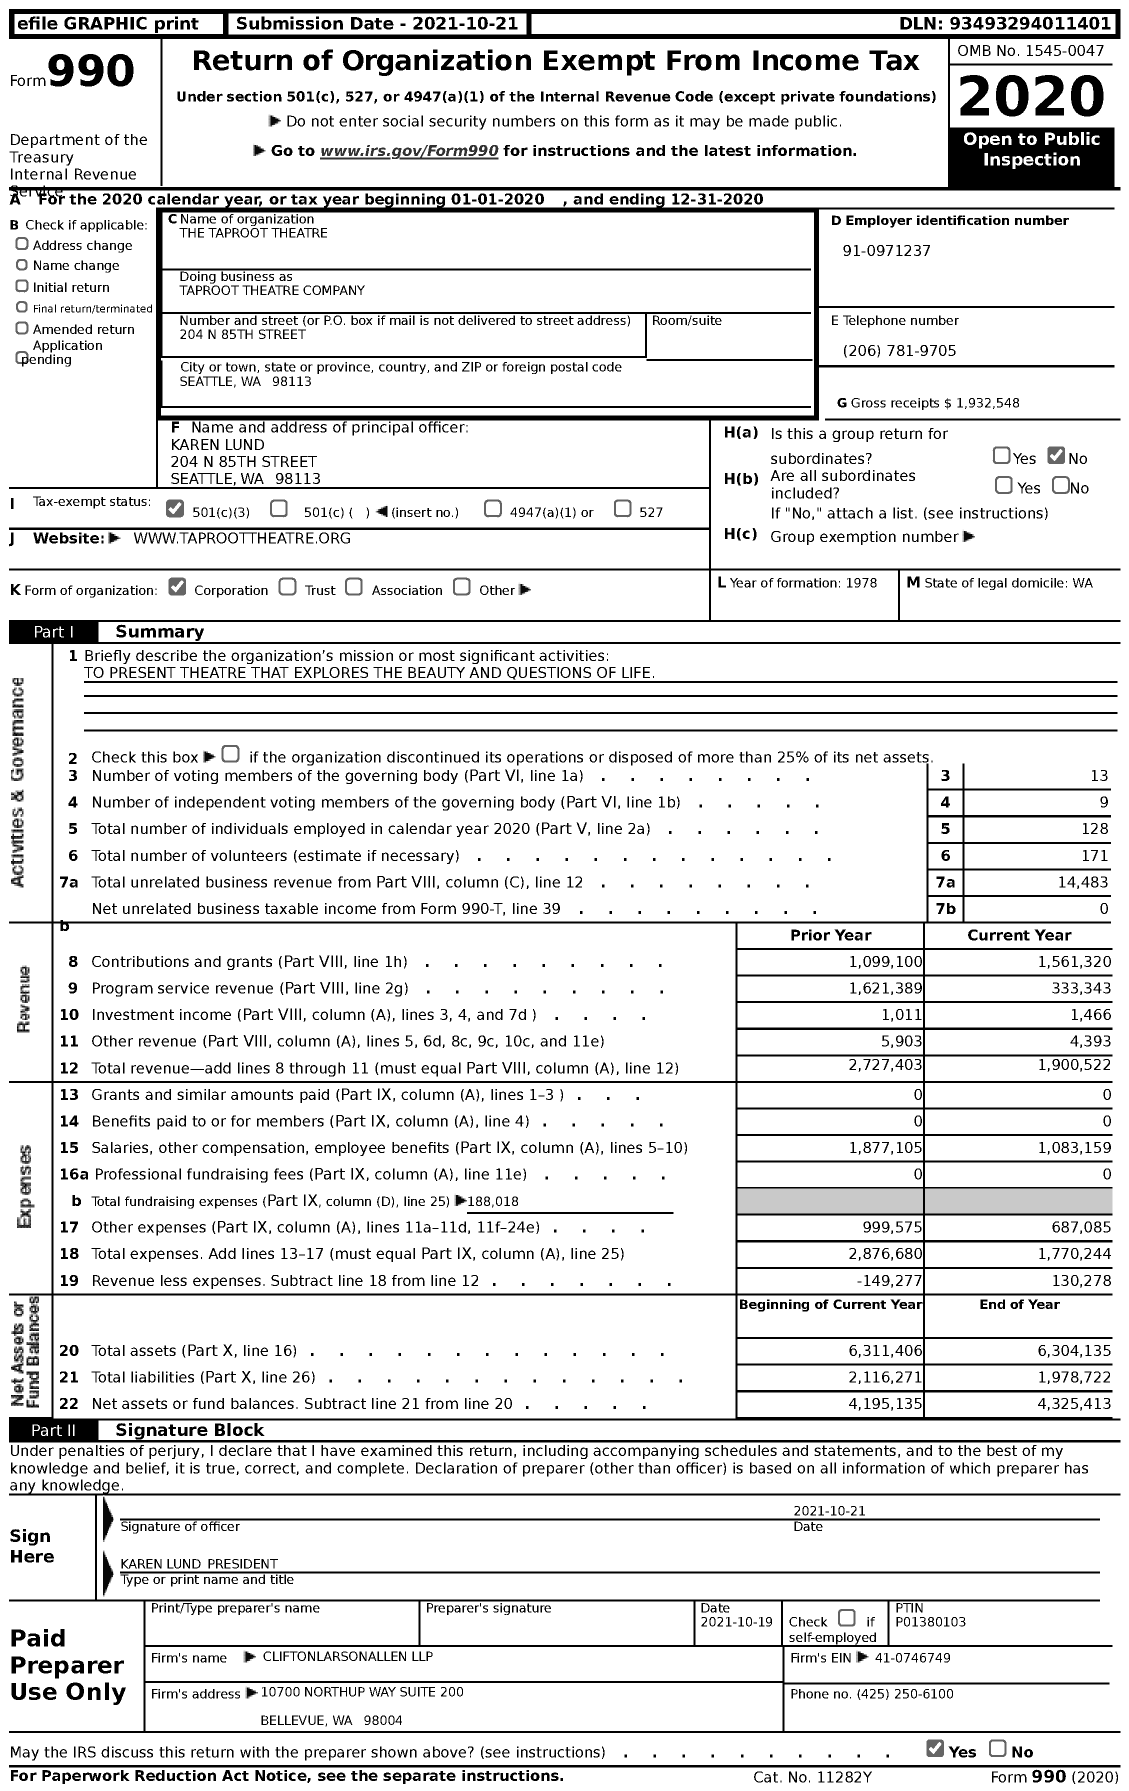 Image of first page of 2020 Form 990 for Taproot Theatre Company